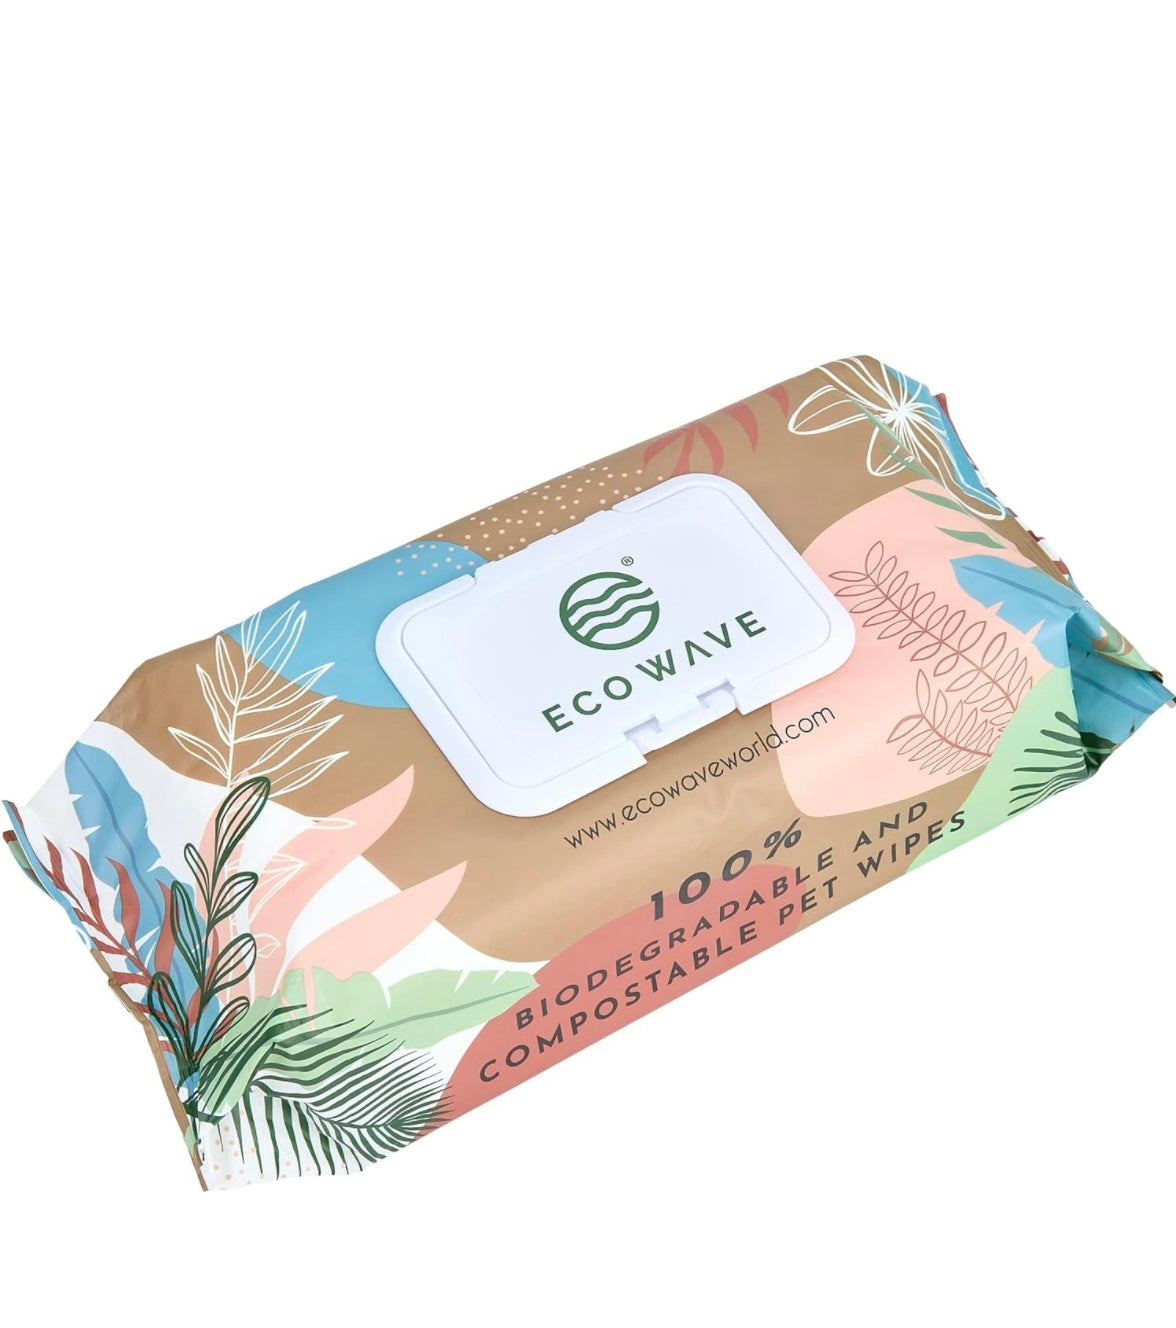 Go green with Eco Wave Pet Wipes with Aloe Vera,